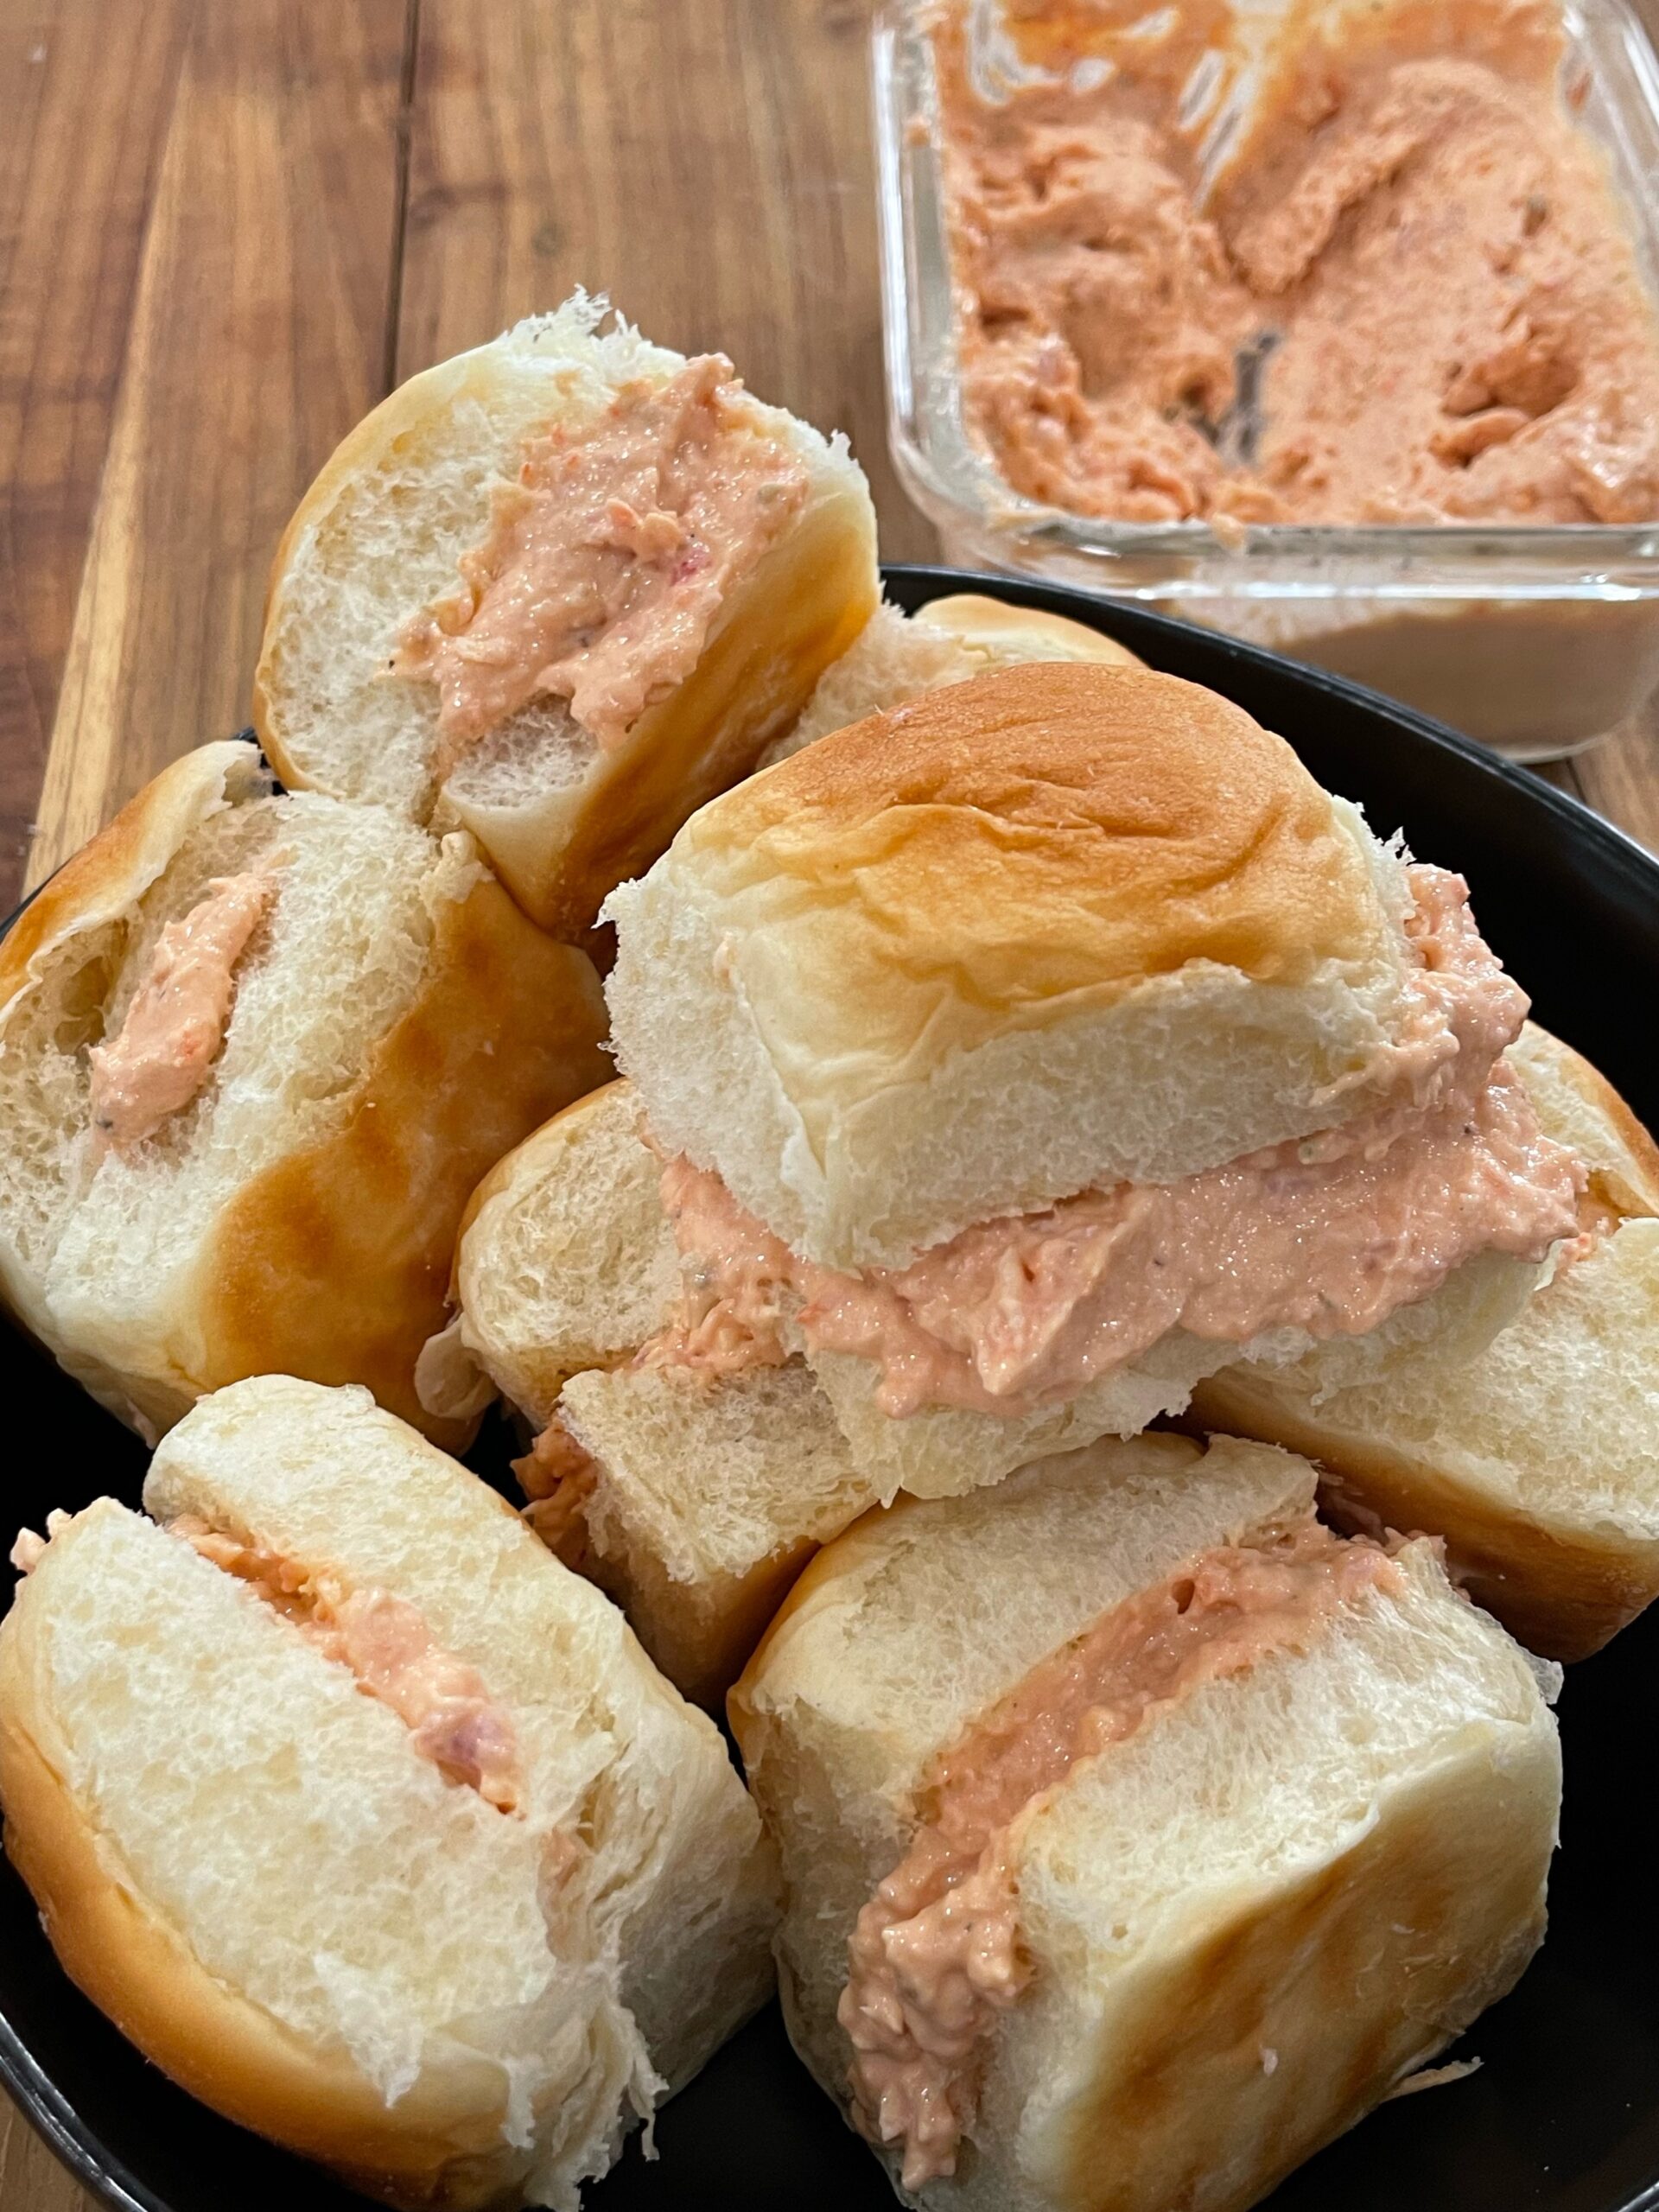 A plate of sandwiches with salmon spread on top.